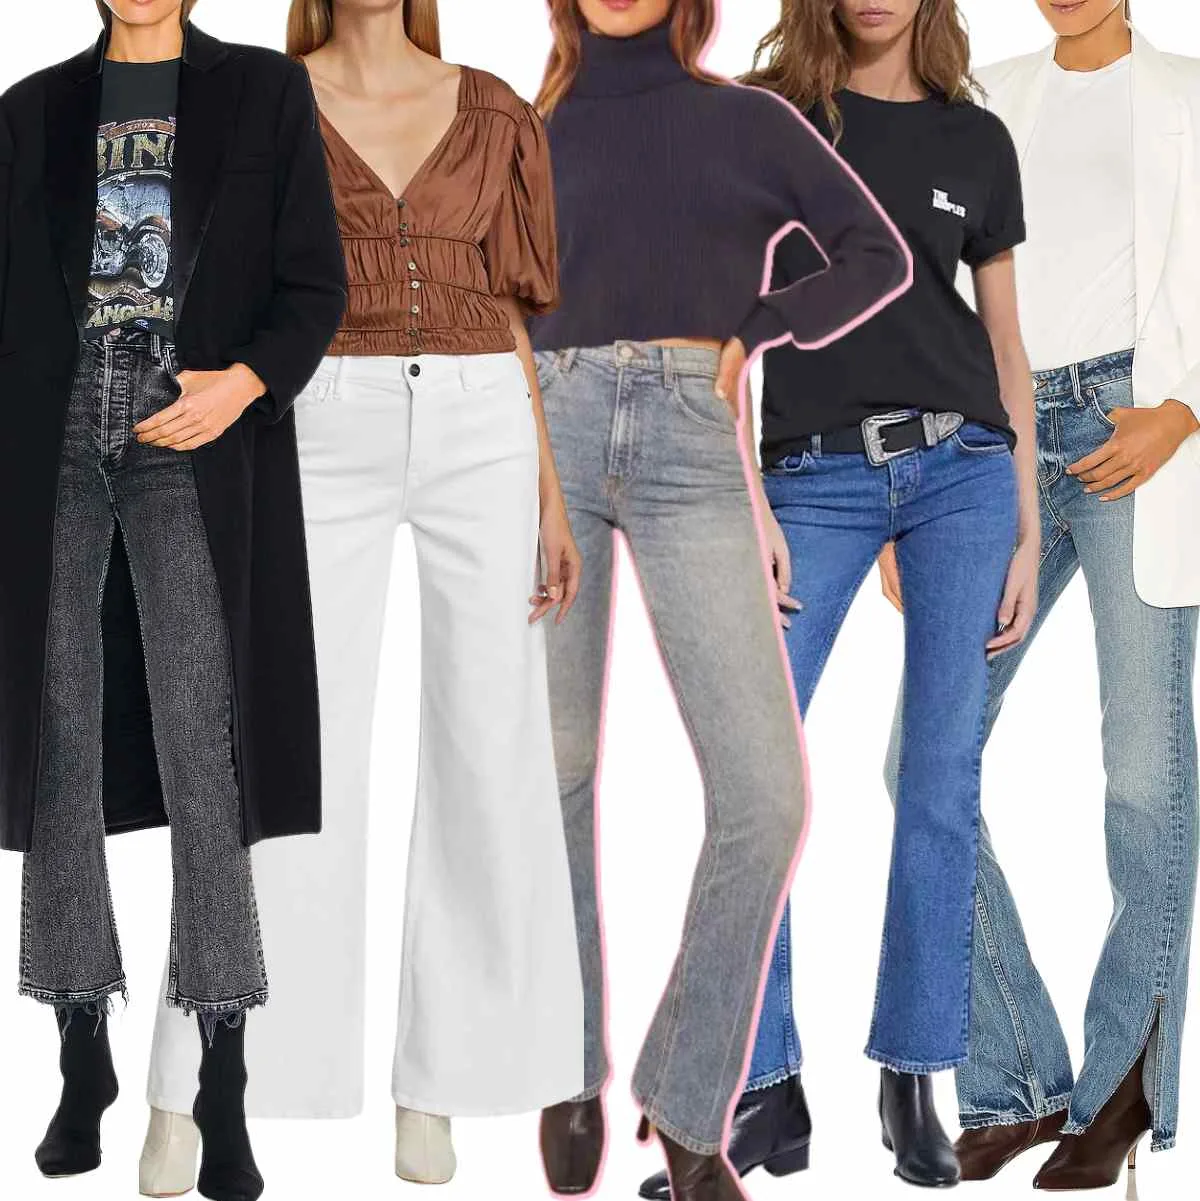 Collage of 4 women wearing ankle boot outfits with flare jeans.